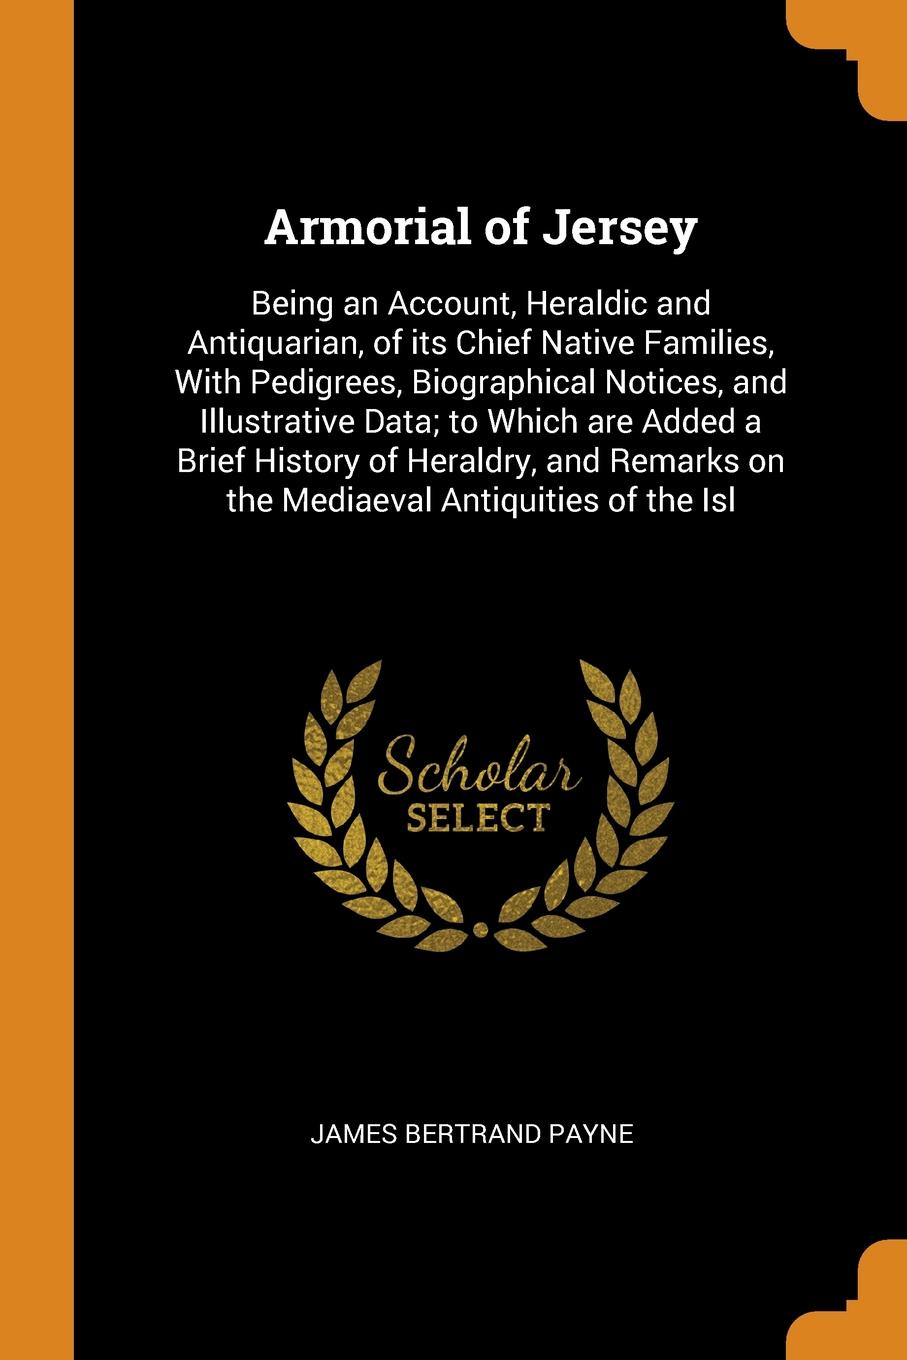 Armorial of Jersey. Being an Account, Heraldic and Antiquarian, of its Chief Native Families, With Pedigrees, Biographical Notices, and Illustrative Data; to Which are Added a Brief History of Heraldry, and Remarks on the Mediaeval Antiquities of ...